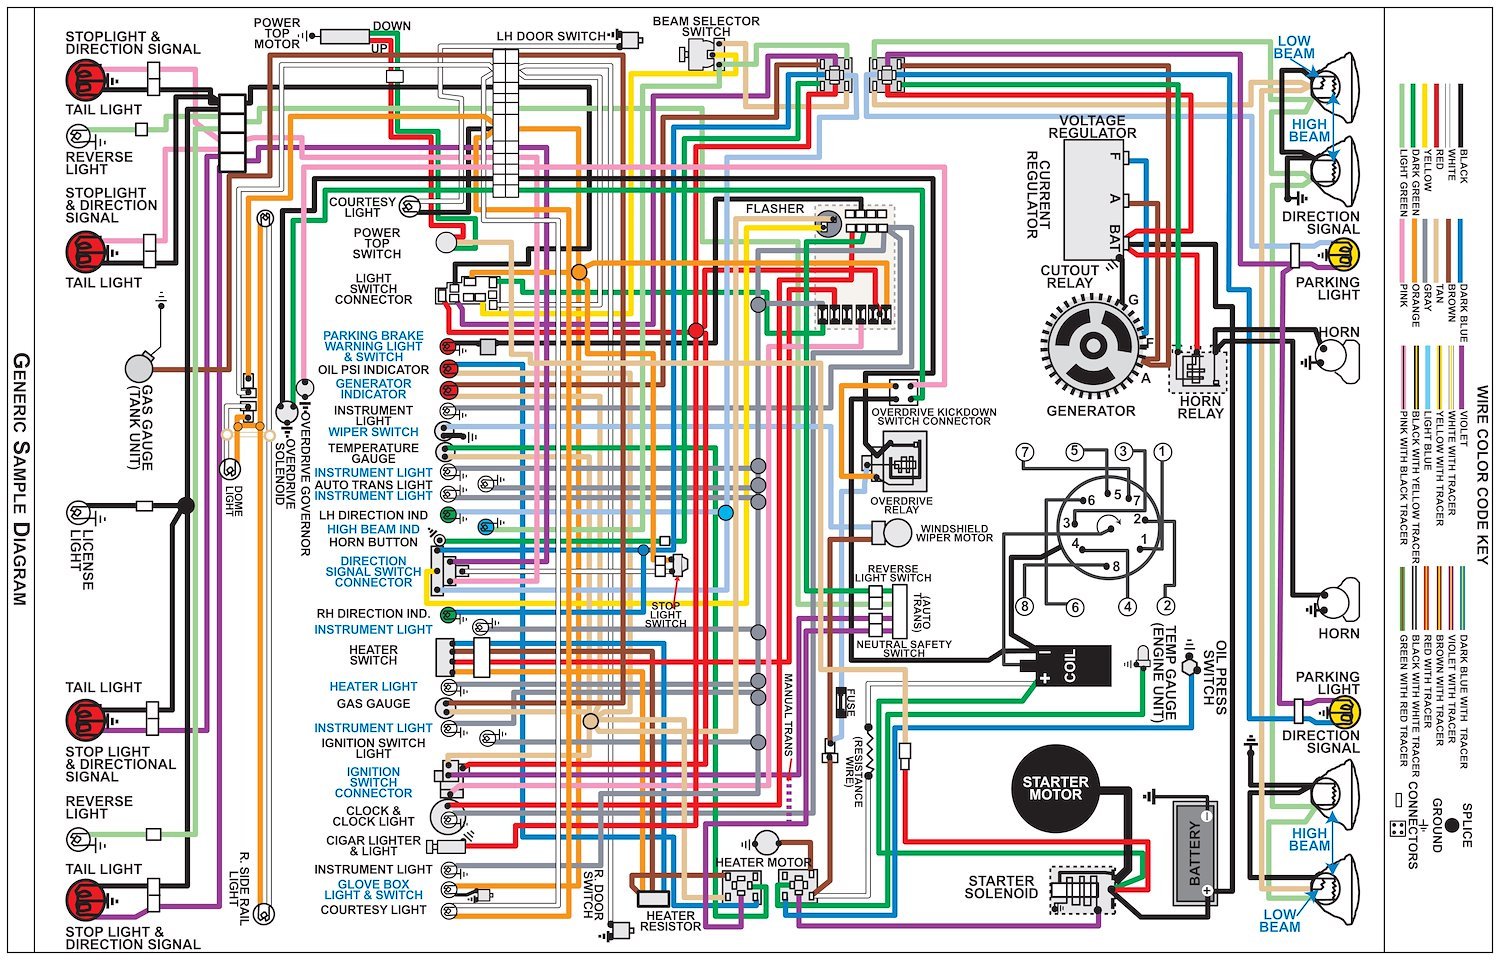 Wiring Diagram for 1966 Ford Fairlane, 11 in